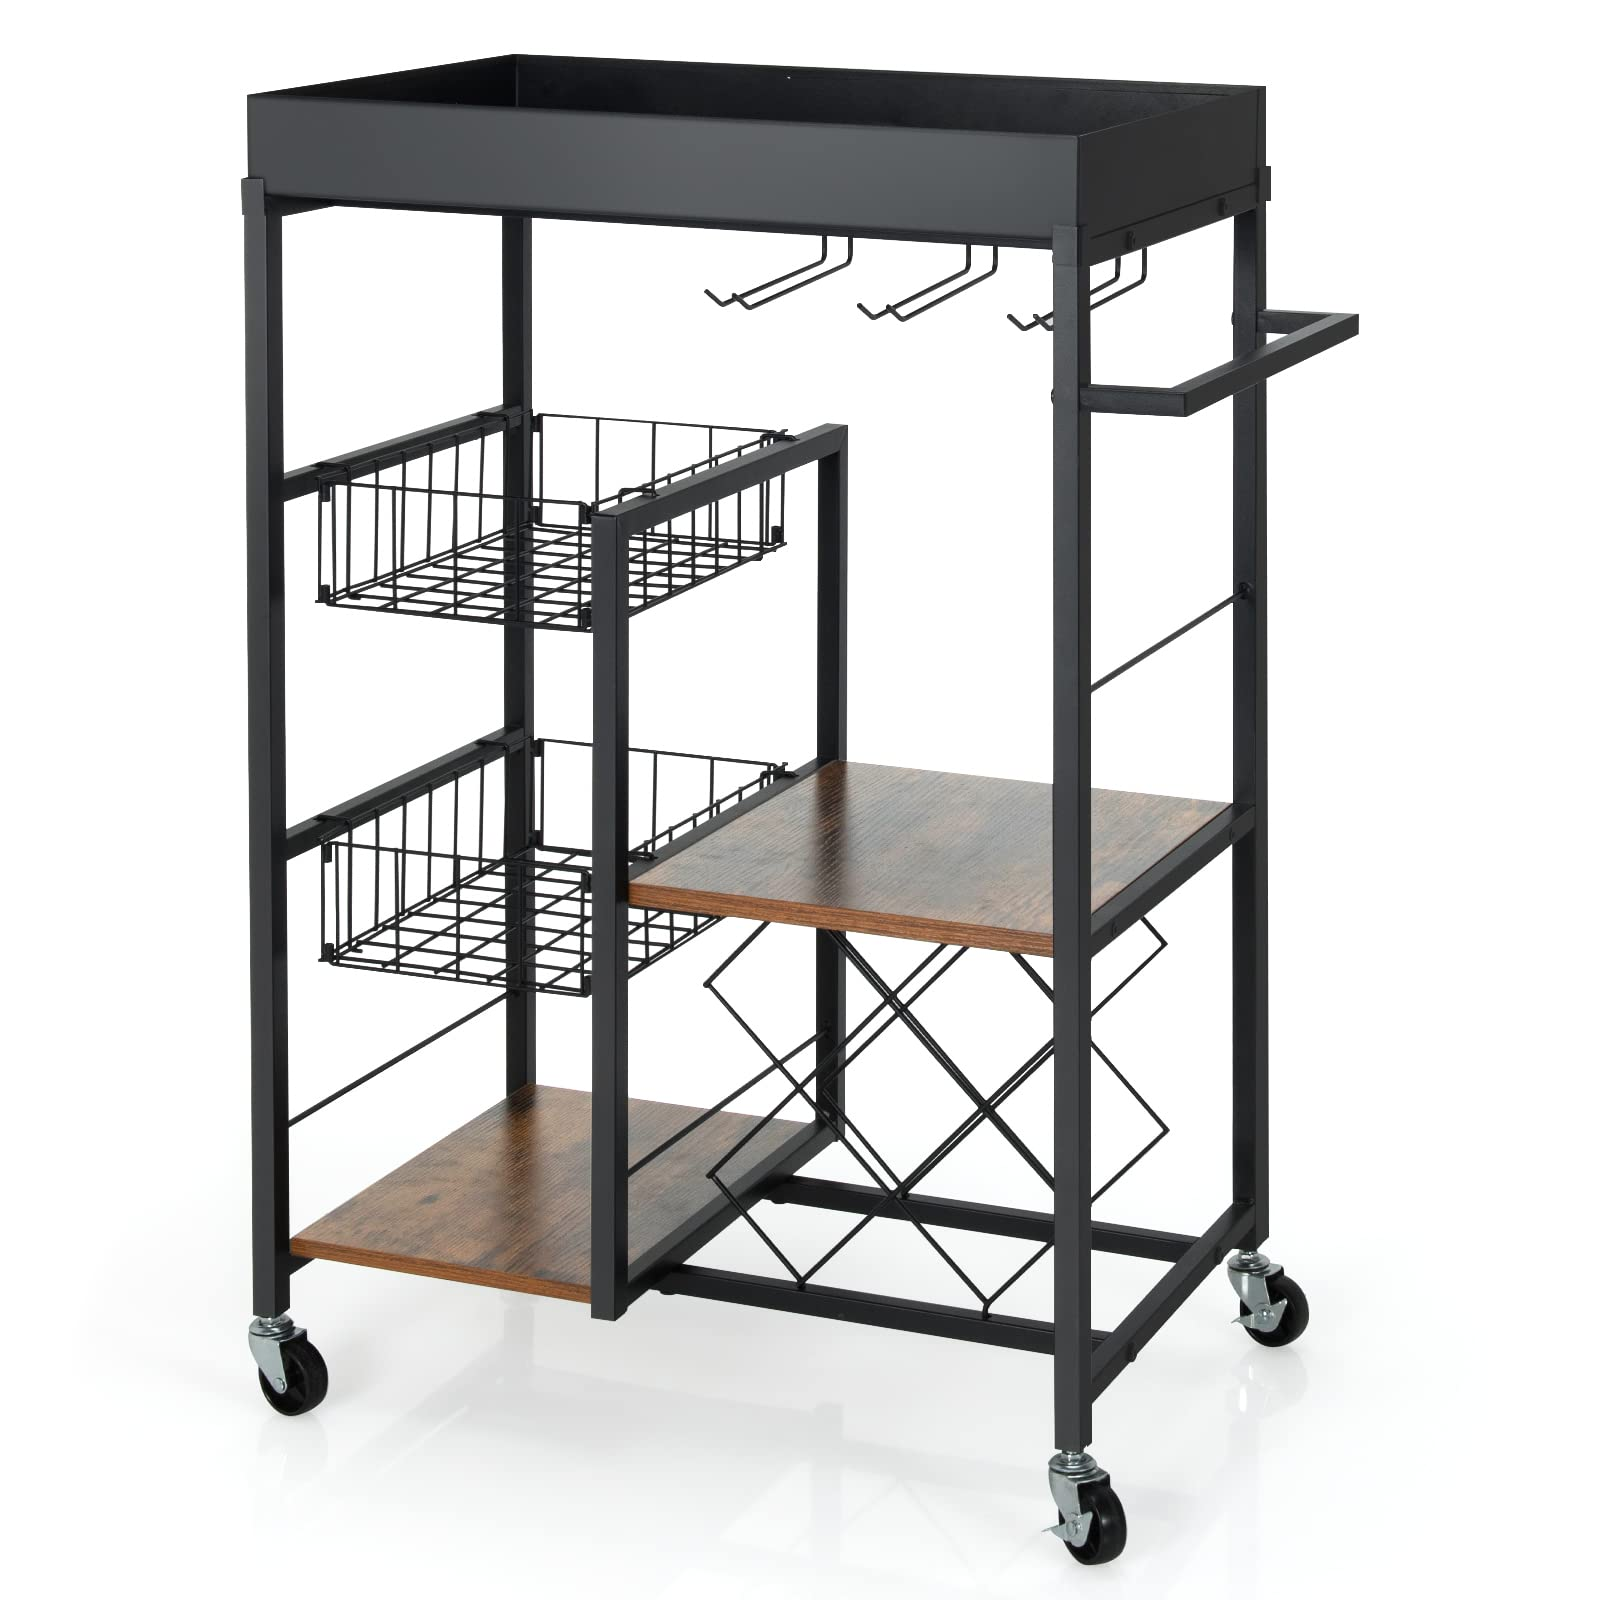 Giantex Kitchen Island Cart on Wheels, Mobile Bar Serving Cart,with Removable Top Tray